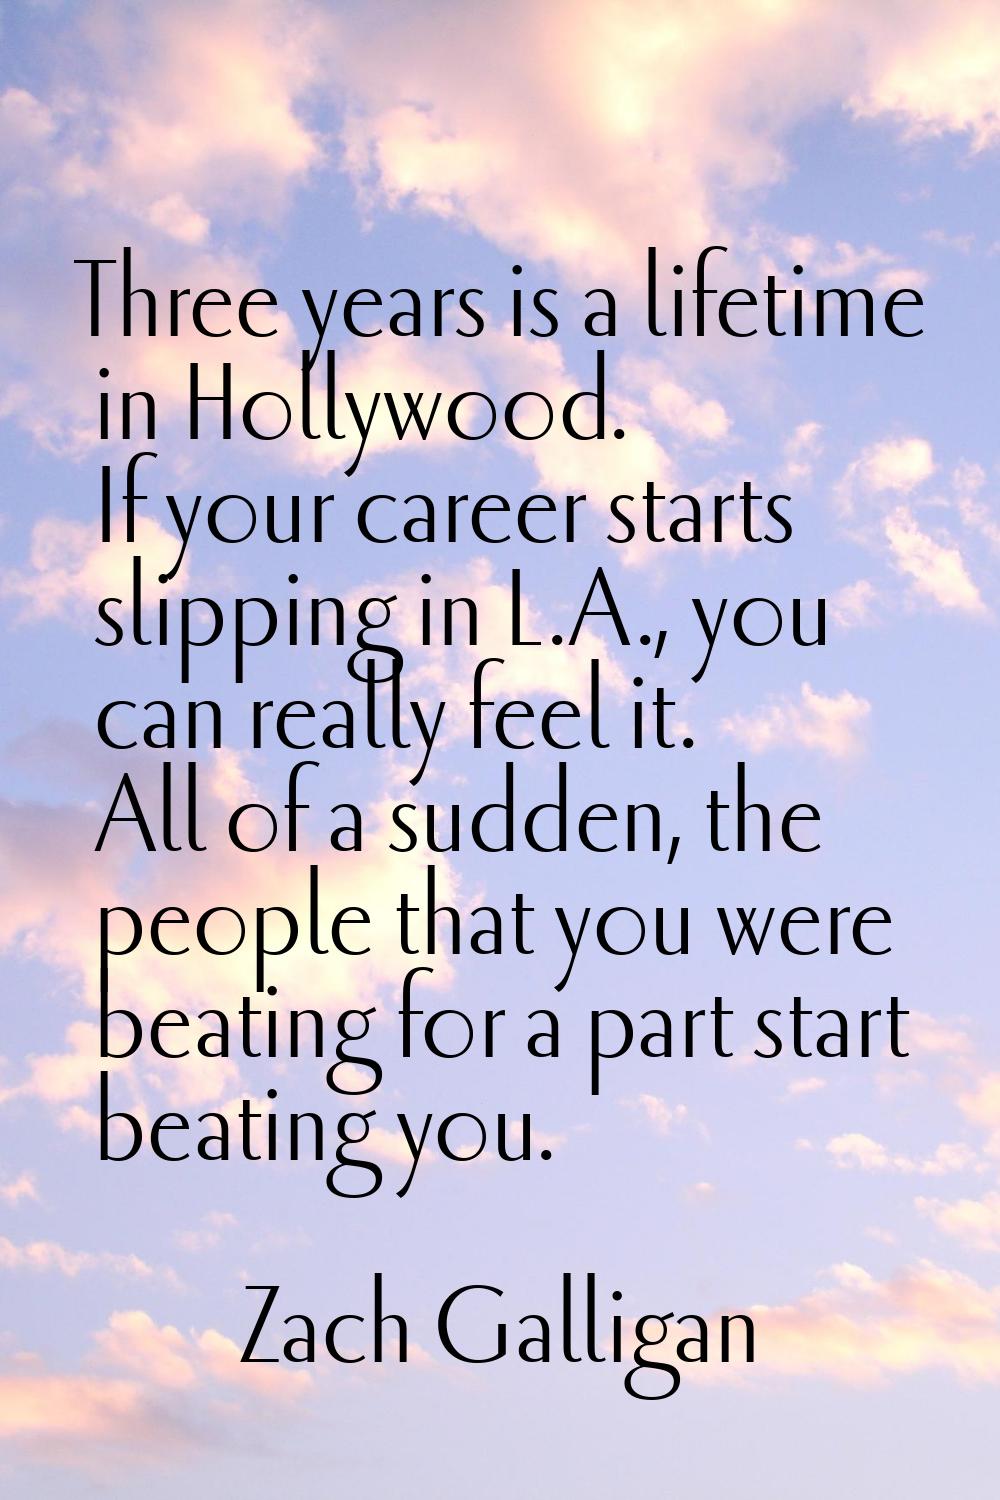 Three years is a lifetime in Hollywood. If your career starts slipping in L.A., you can really feel